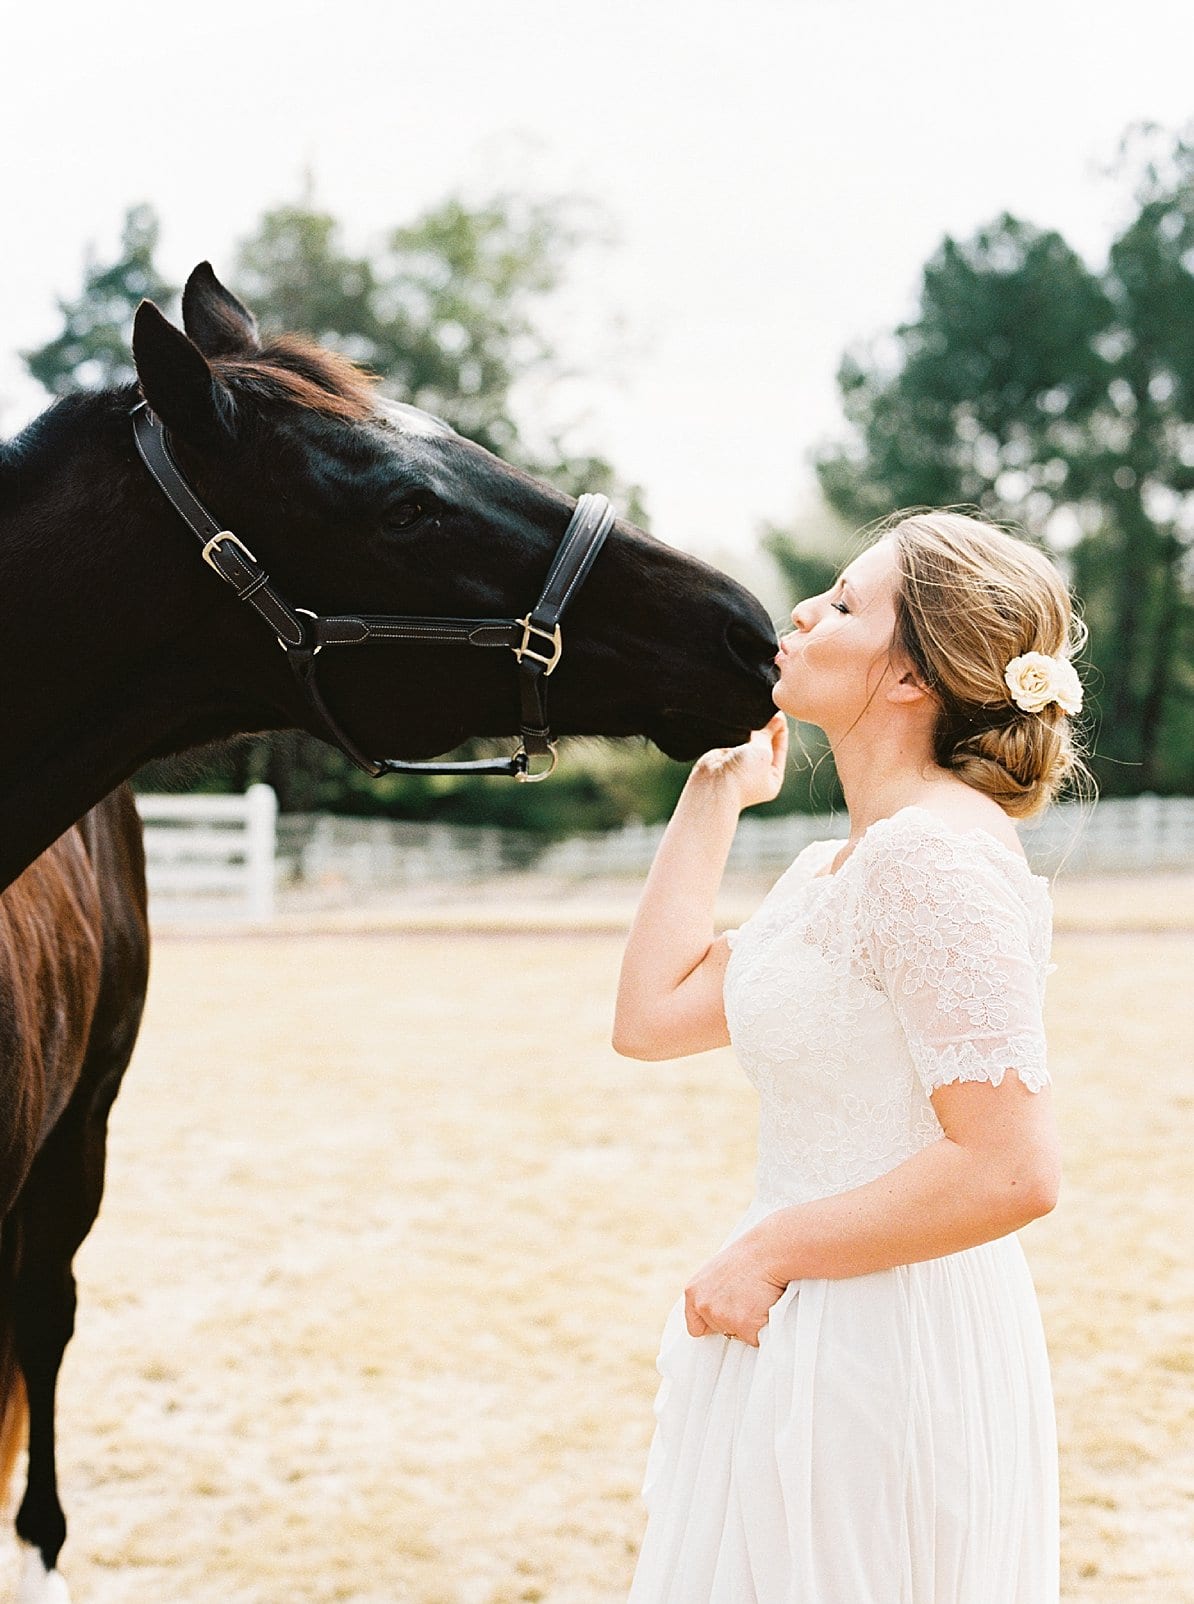 Wakefield Barn bride in a short sleeve lace gown kissing a horse photo